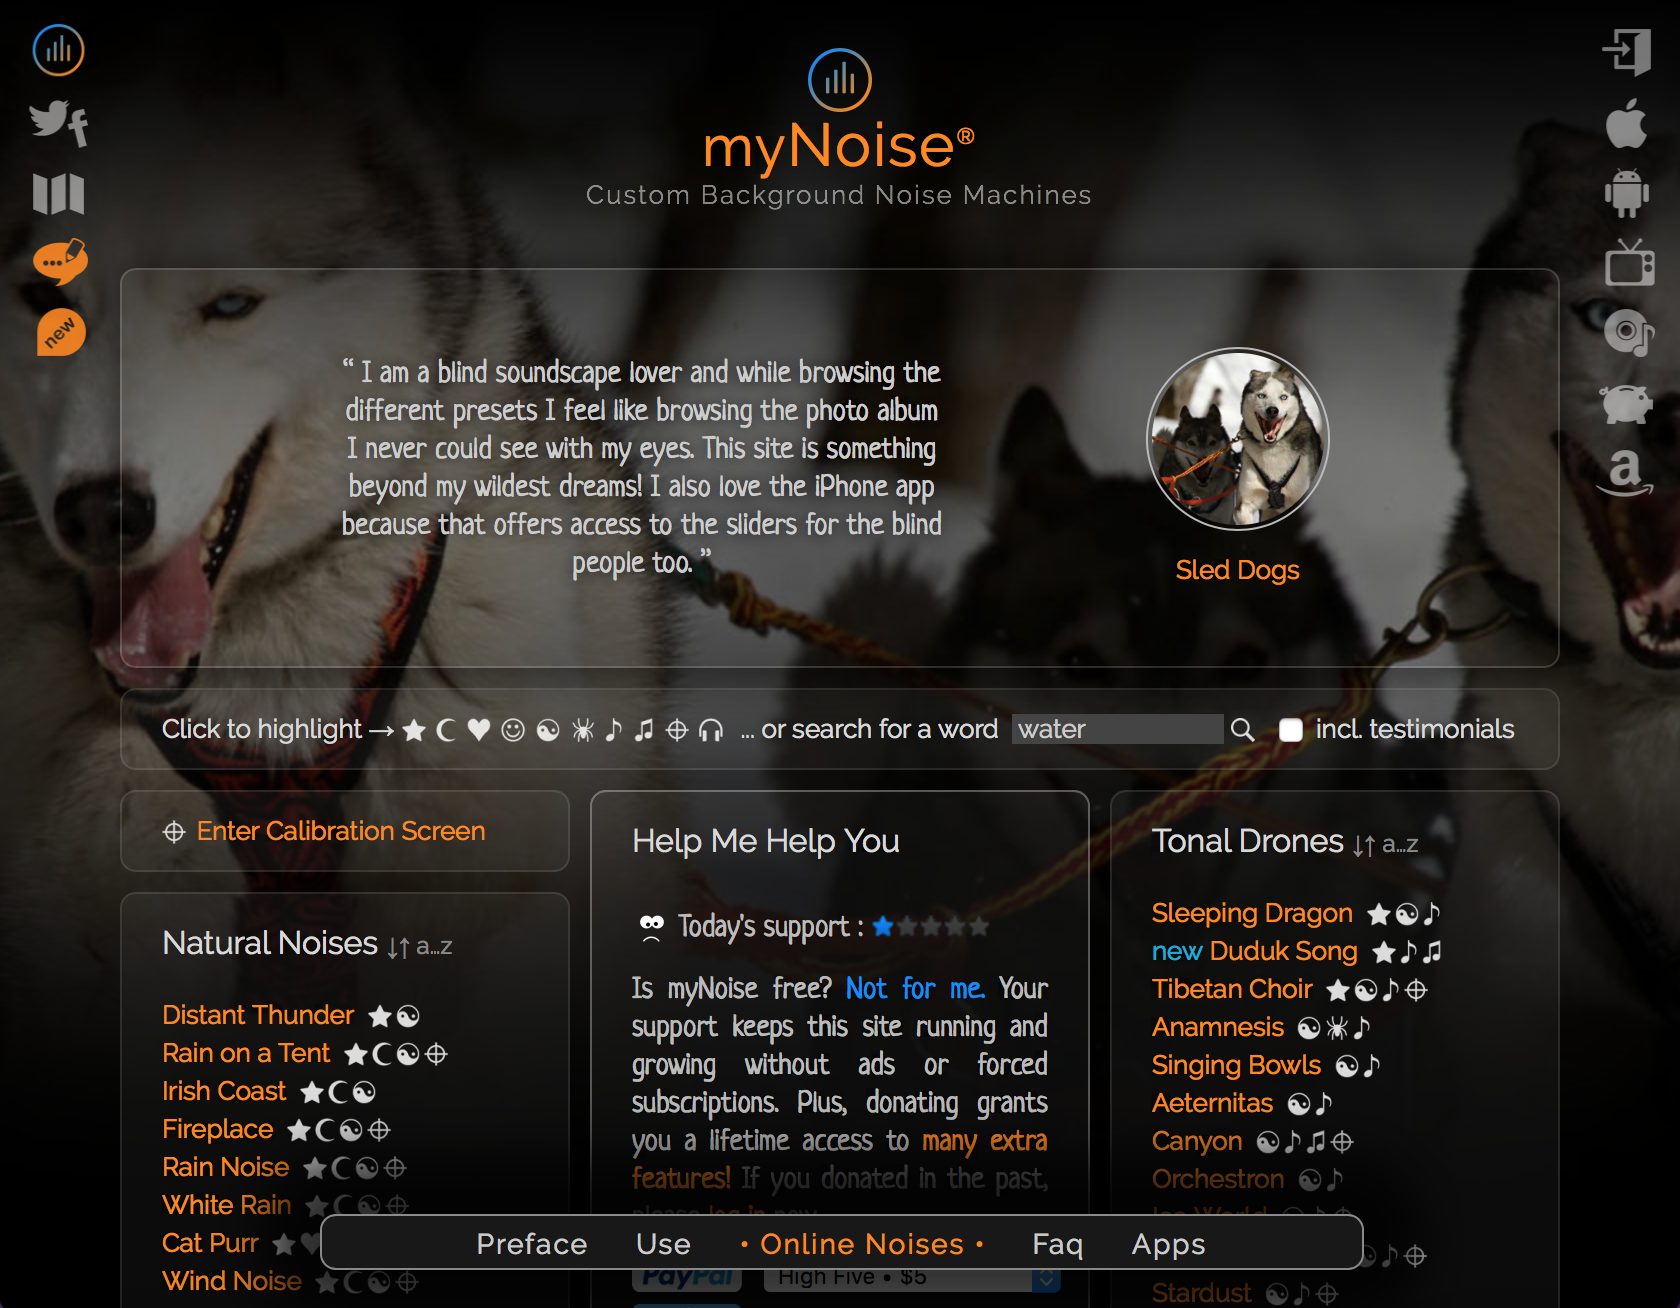 myNoise is a white noise generator for minimizing distraction and boosting productivity at work.